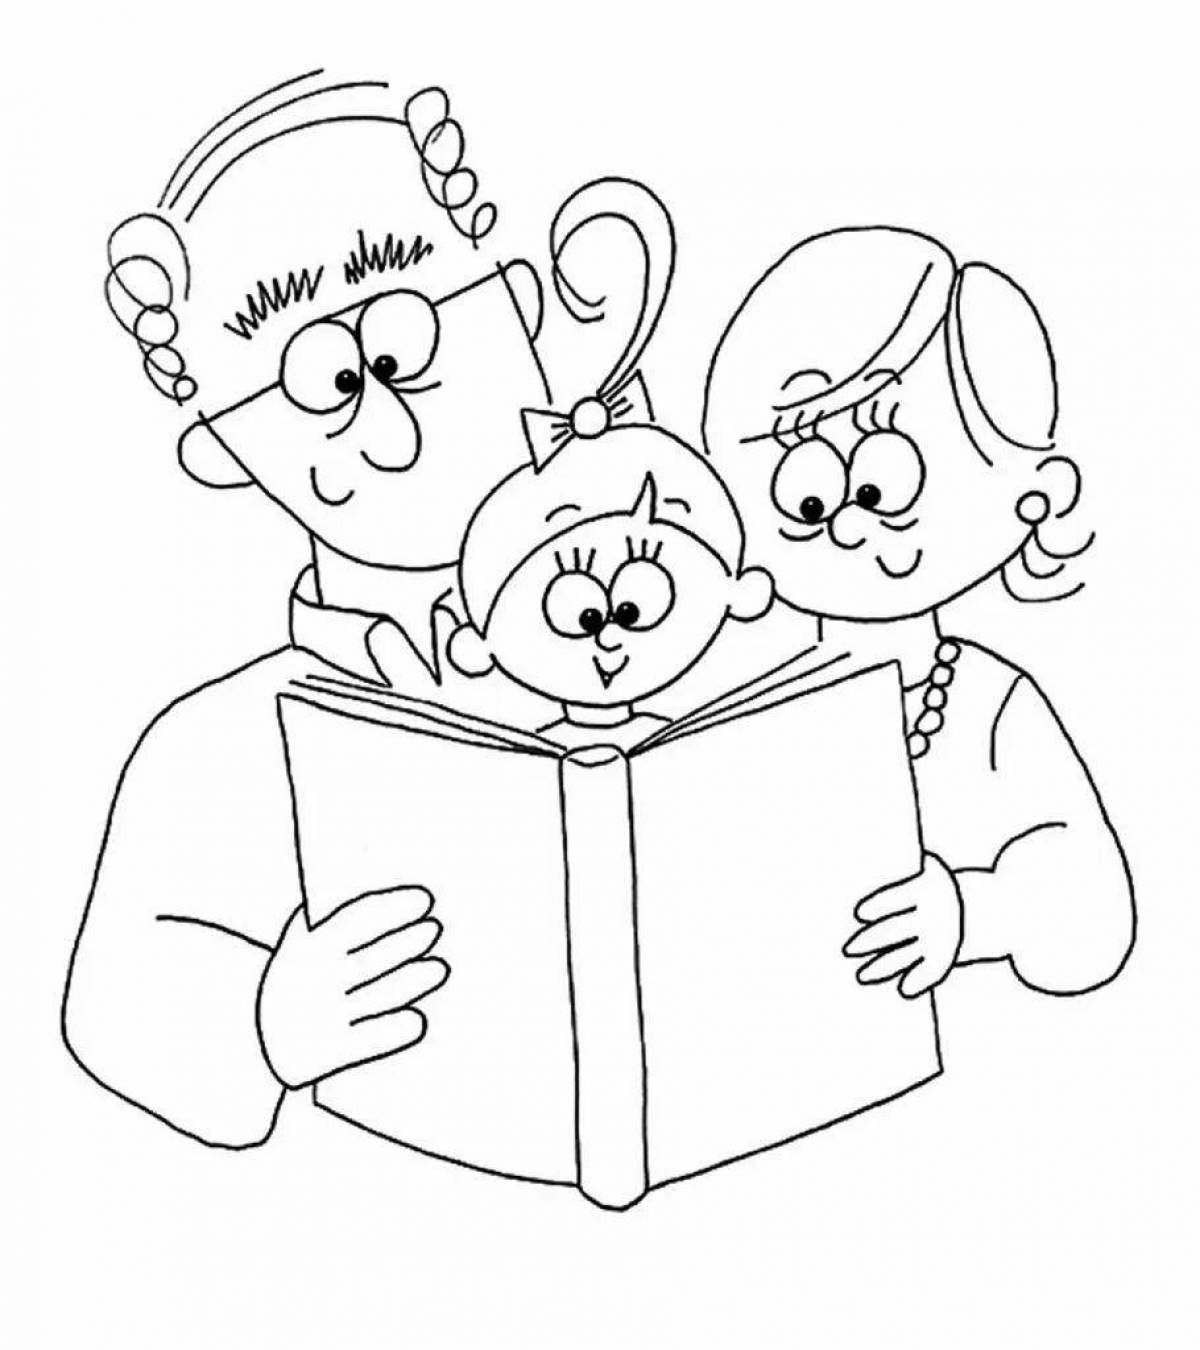 Glowing birthday grandfather coloring page from granddaughter